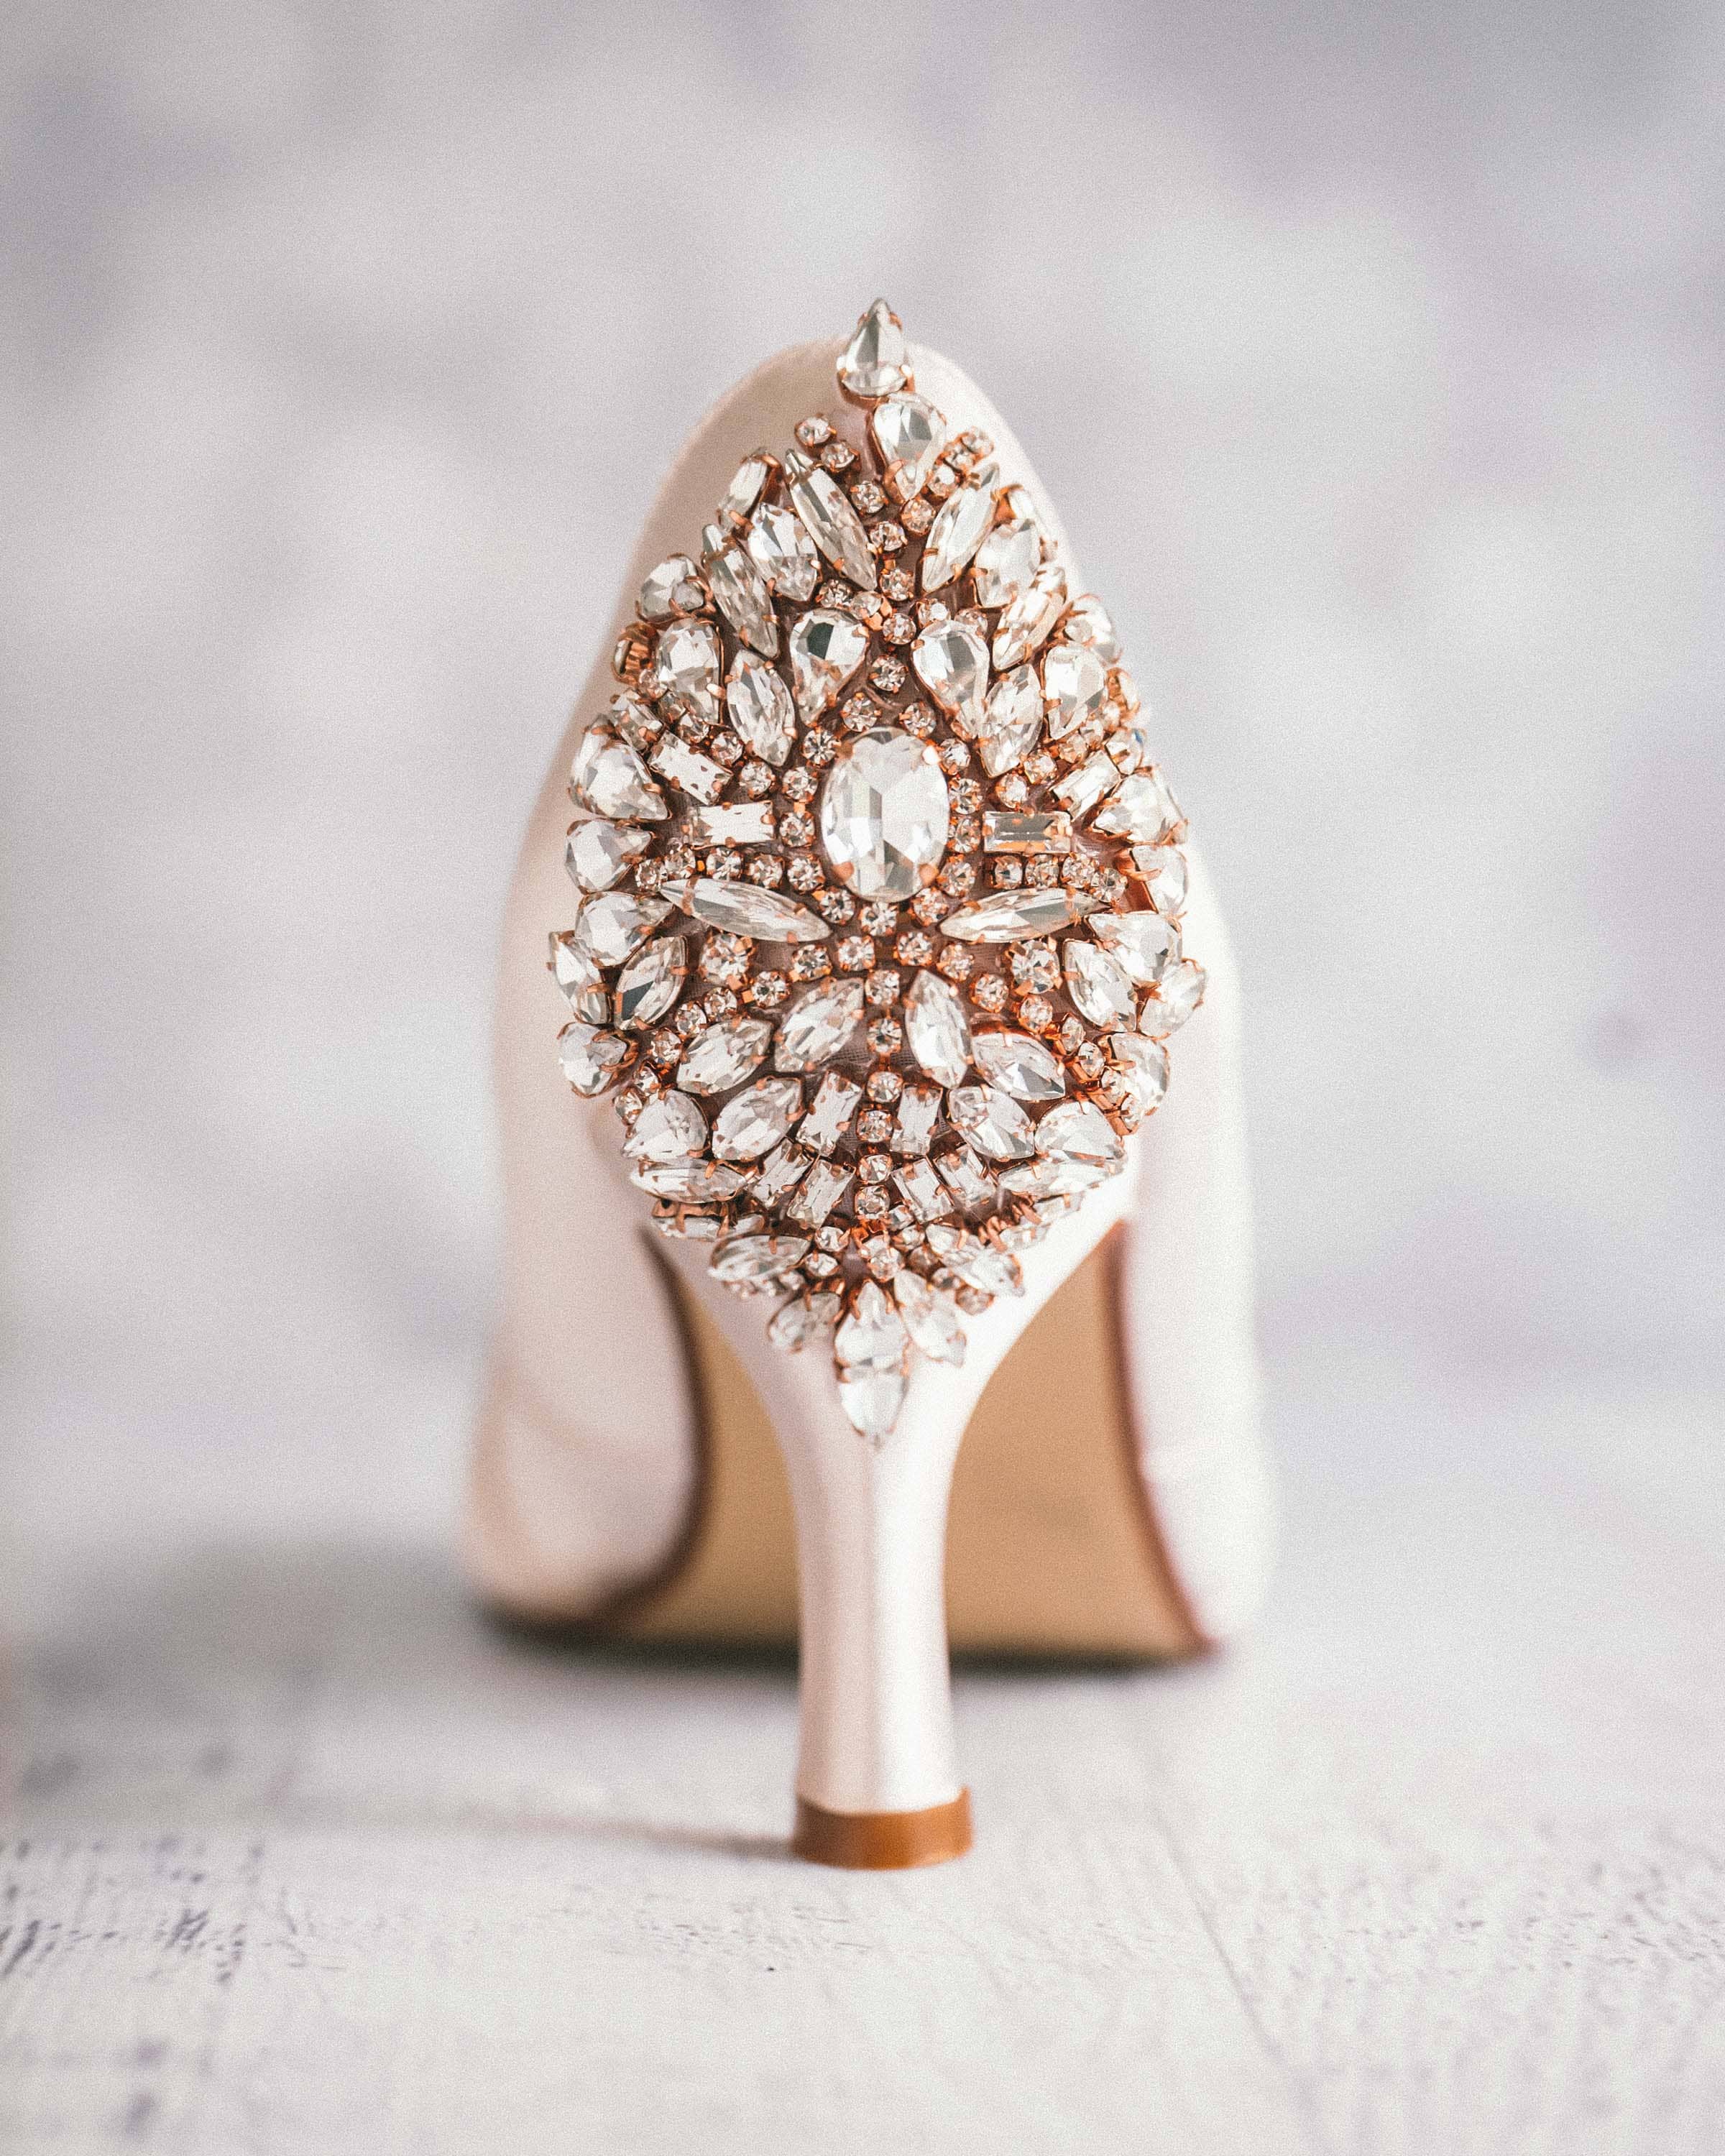 Rose Gold Crystal Black Heels With Diamonds With Pointed Rhinestones For  Womens Wedding, Evening Party, And Prom From Crown2014, $41.1